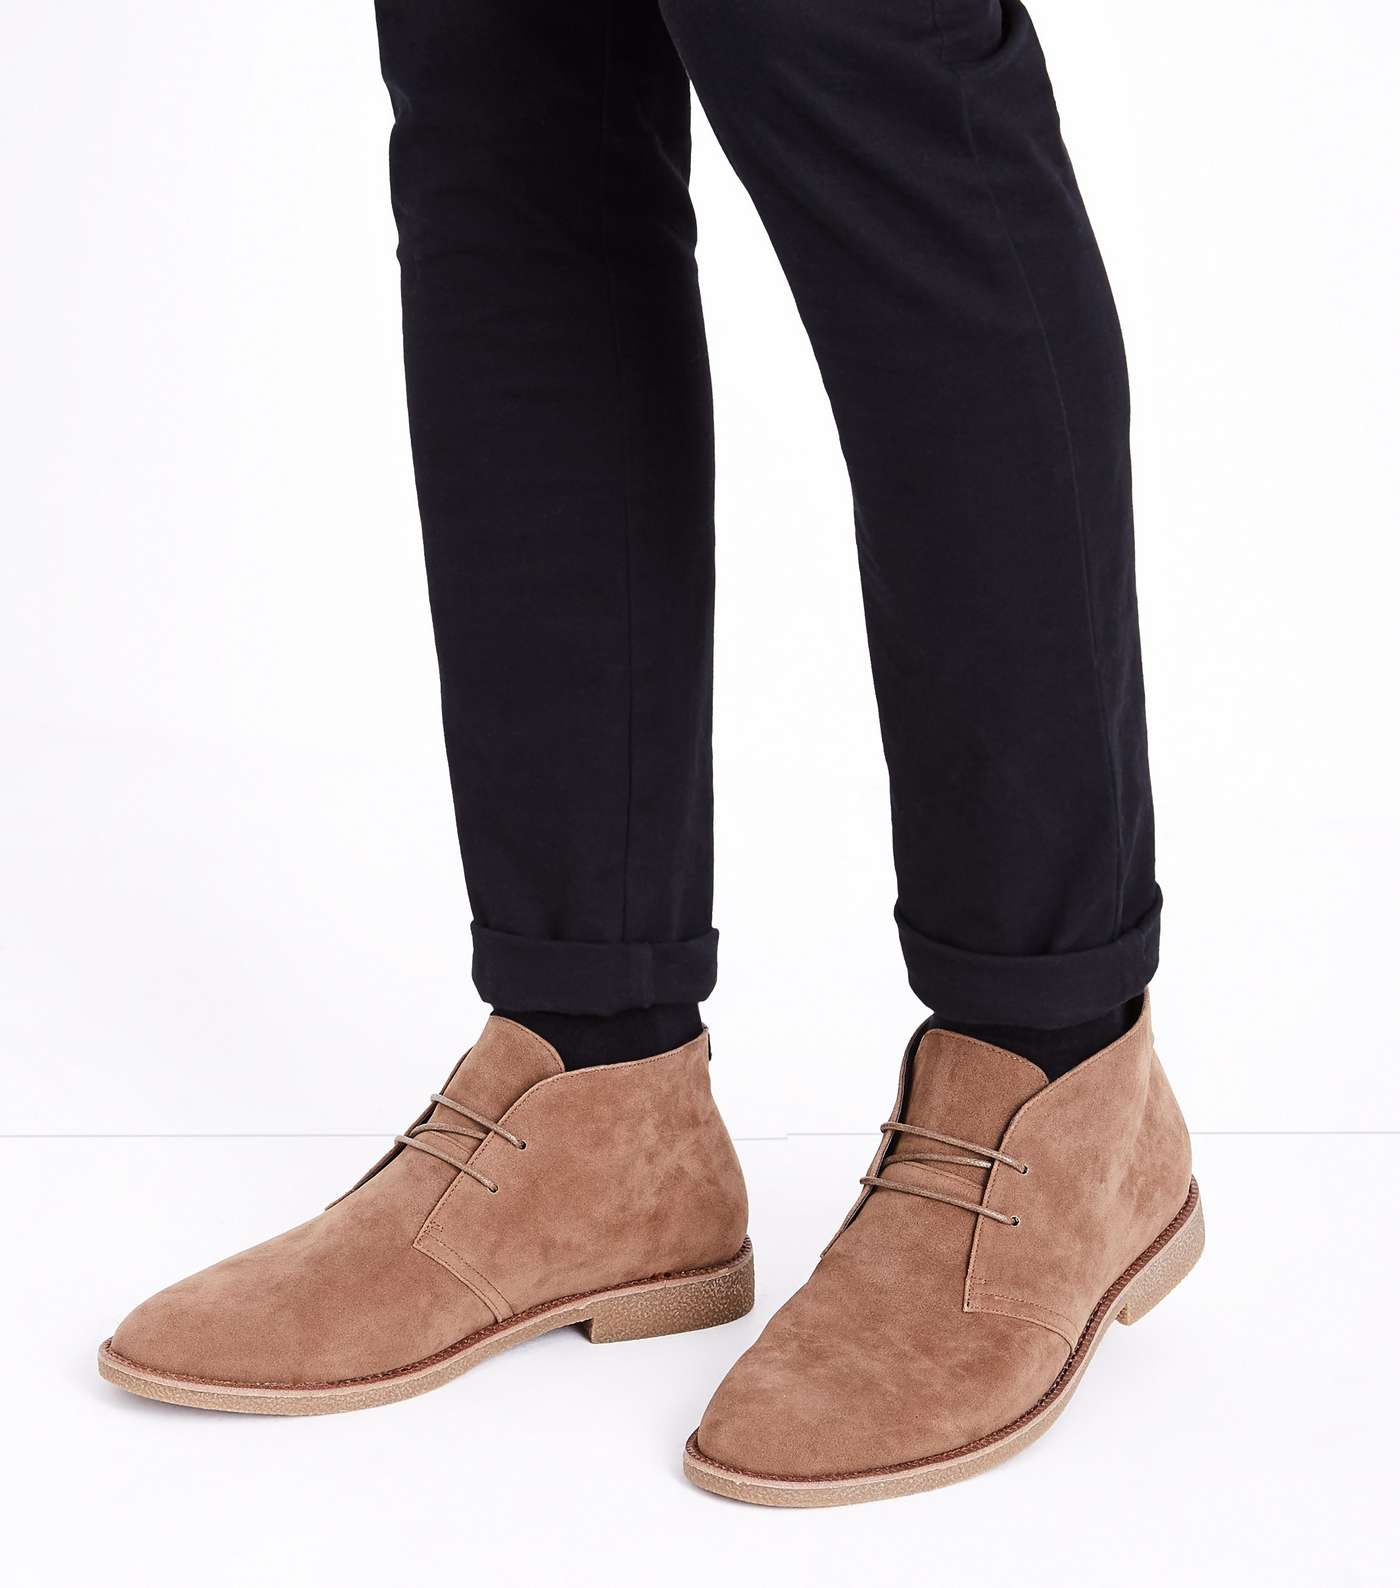 Stone Faux Suede Desert Boots Image 2